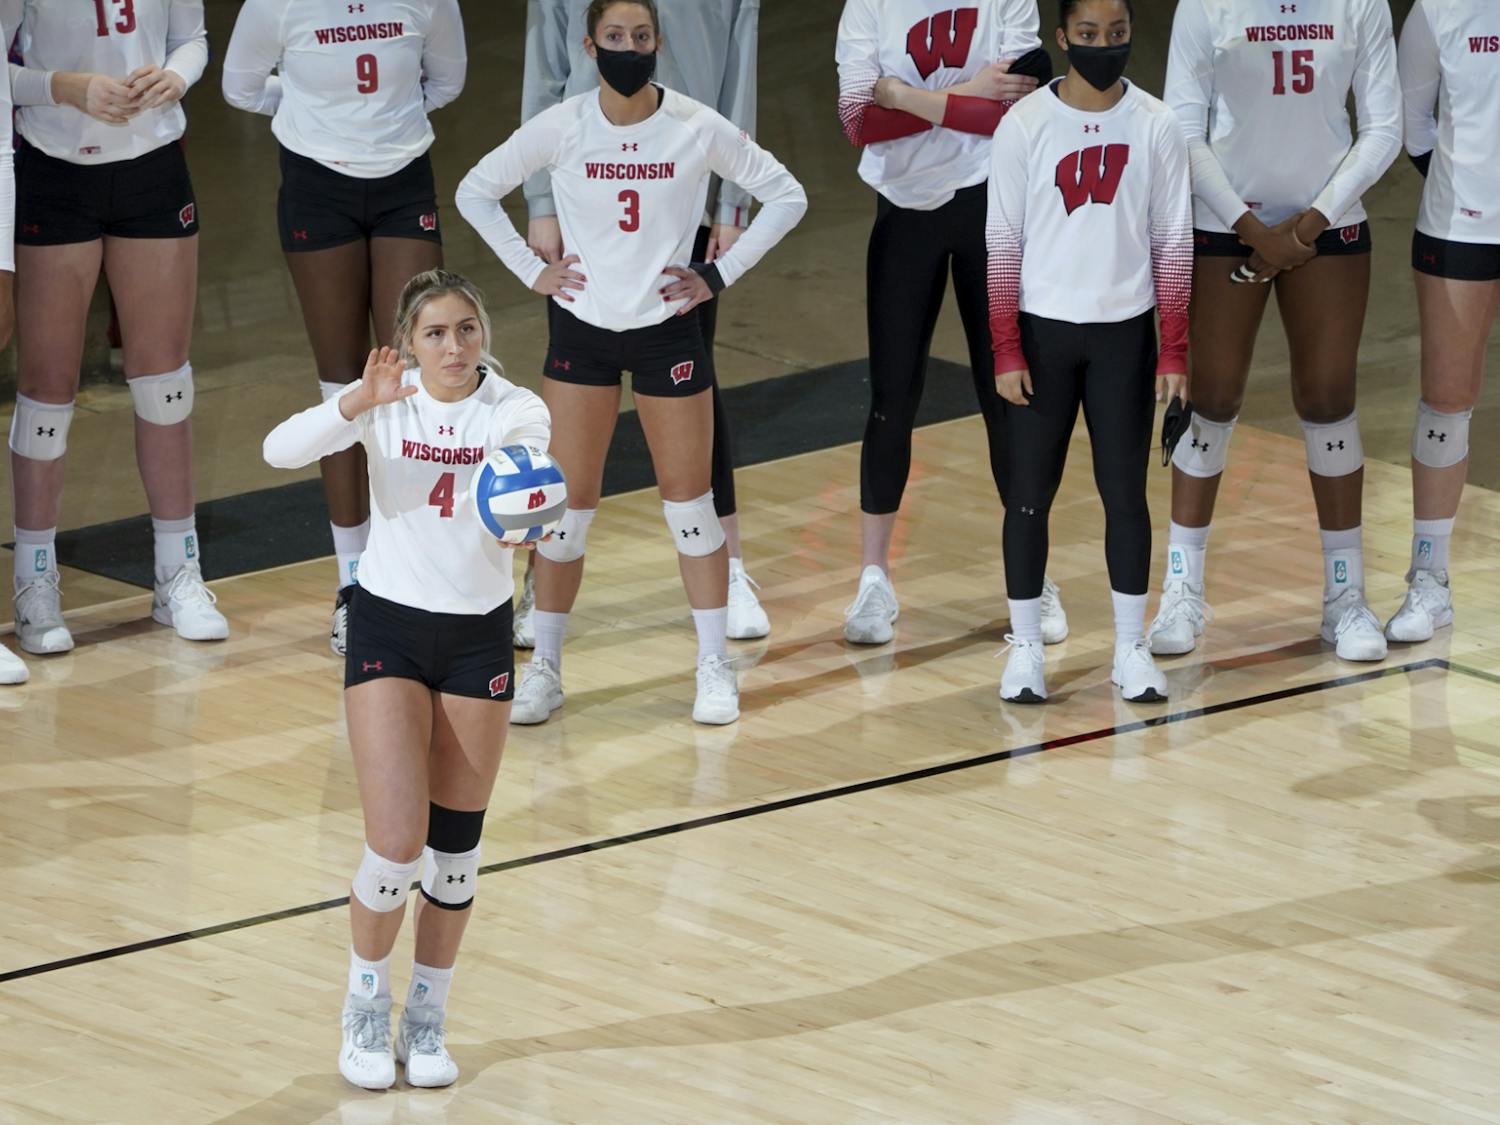 A Badger volleyball player getting ready to serve the ball.